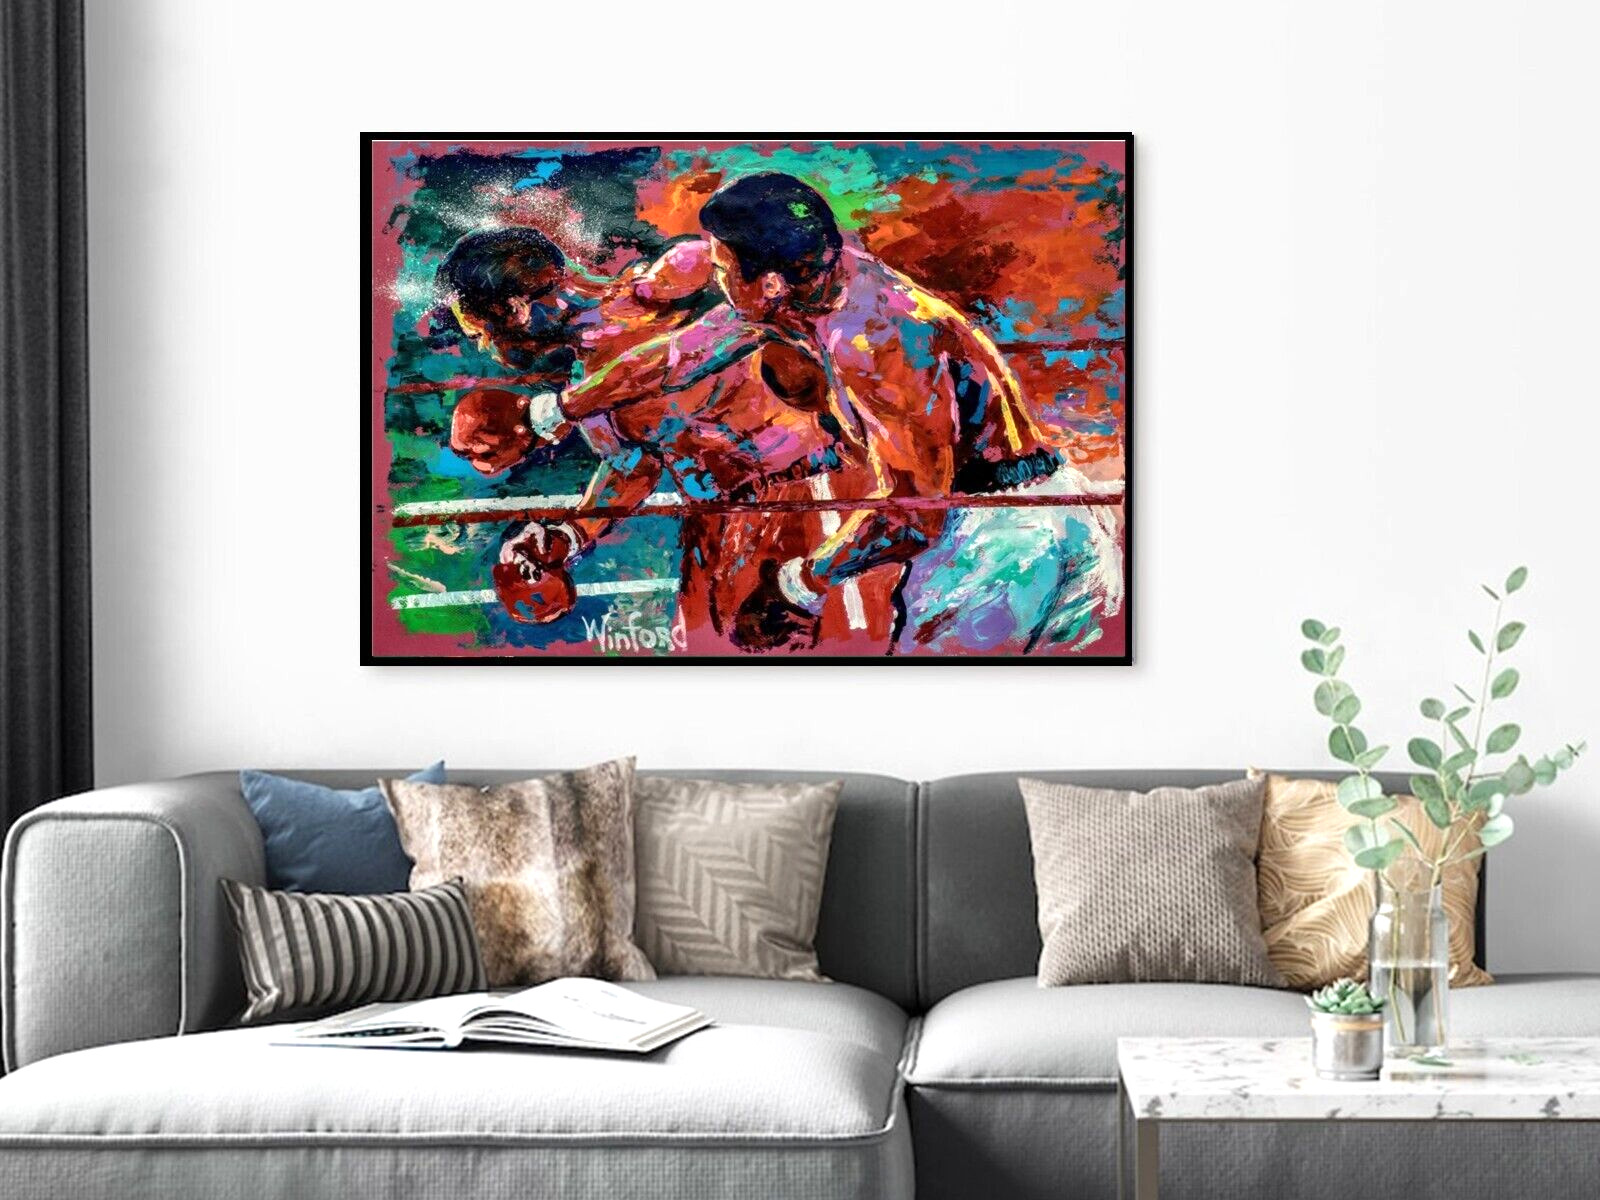 Sale Muhamad Ali Foreman Rumble Textured 36 X 24 Canvas Giclee Framed795 Now 245